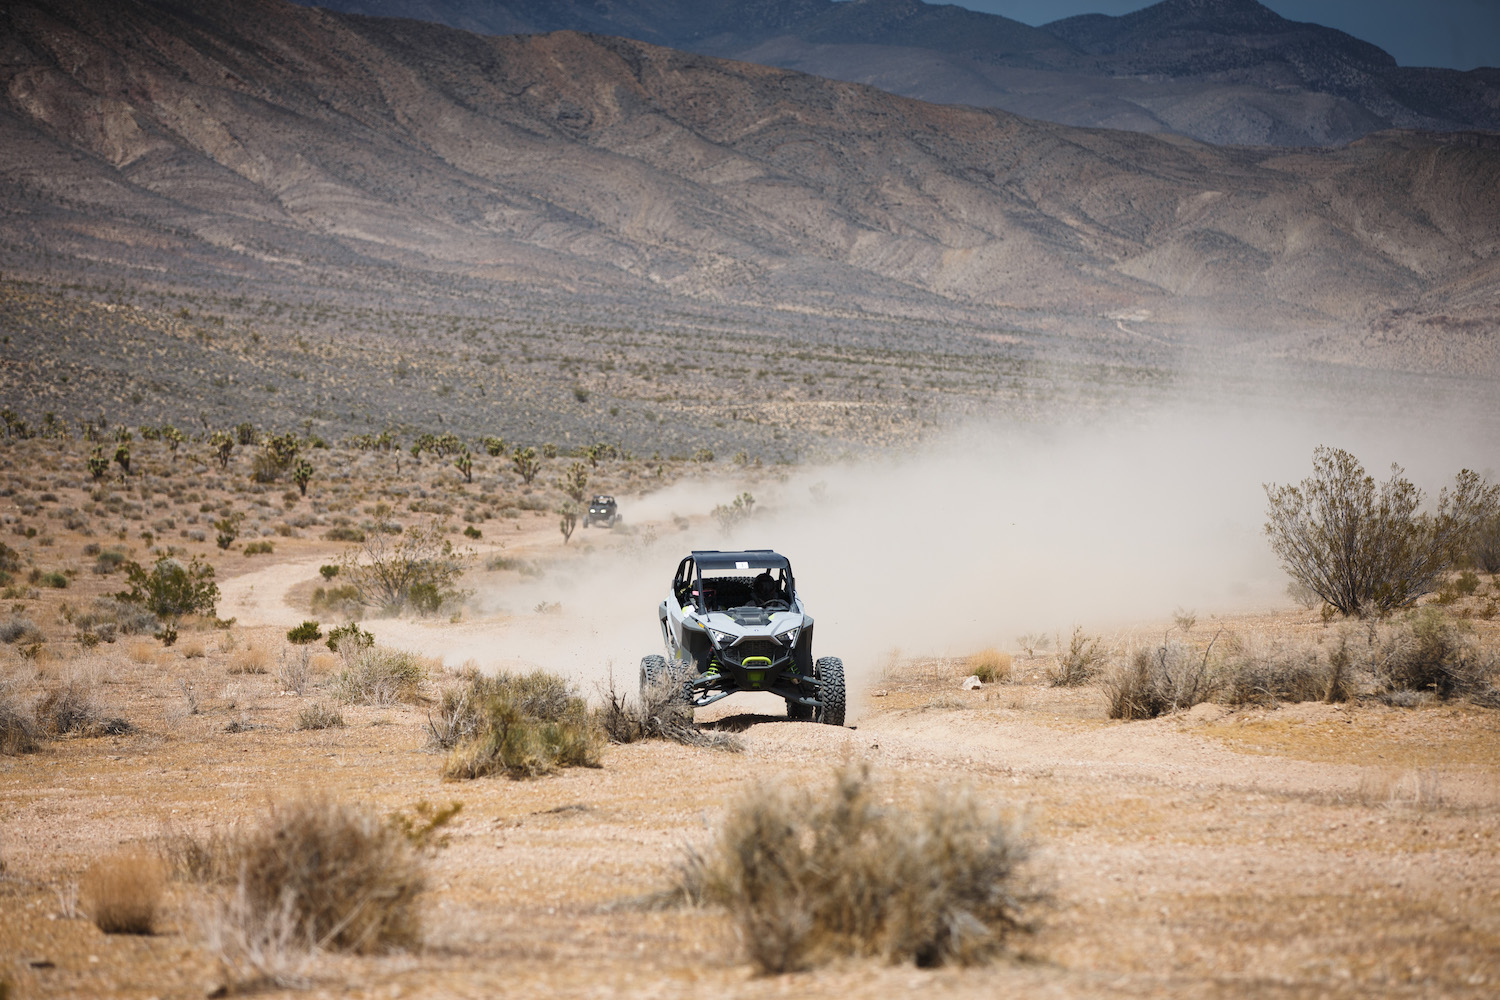 Far away shot of front end of Polaris RZR Turbo R driving through the desert with a dust cloud on a dirt path.